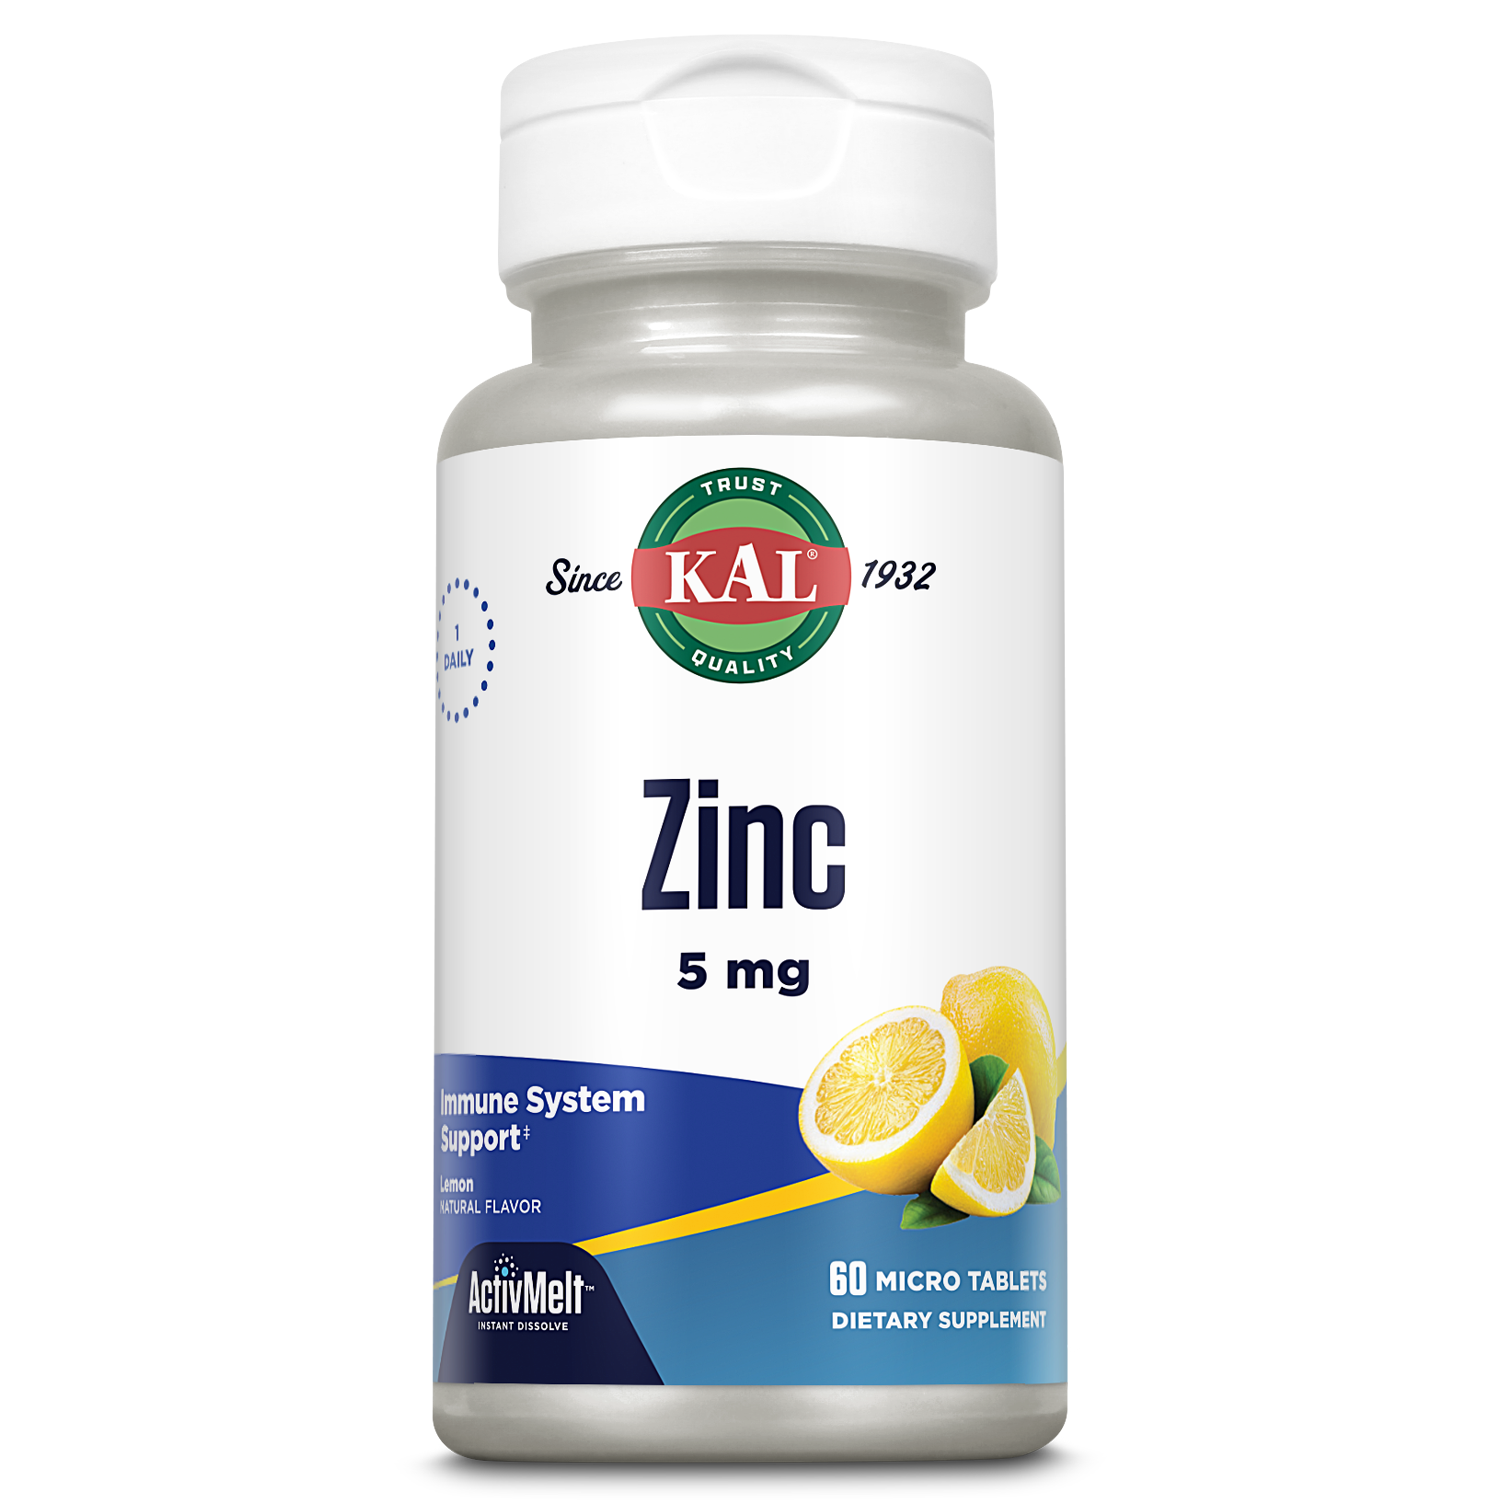 KAL Zinc 5 mg ActivMelt | Sweet Lemon Flavor | Healthy Protein Synthesis, Growth, Taste Acuity & Immune System Function Support | 60 Micro Tablets - image 1 of 6